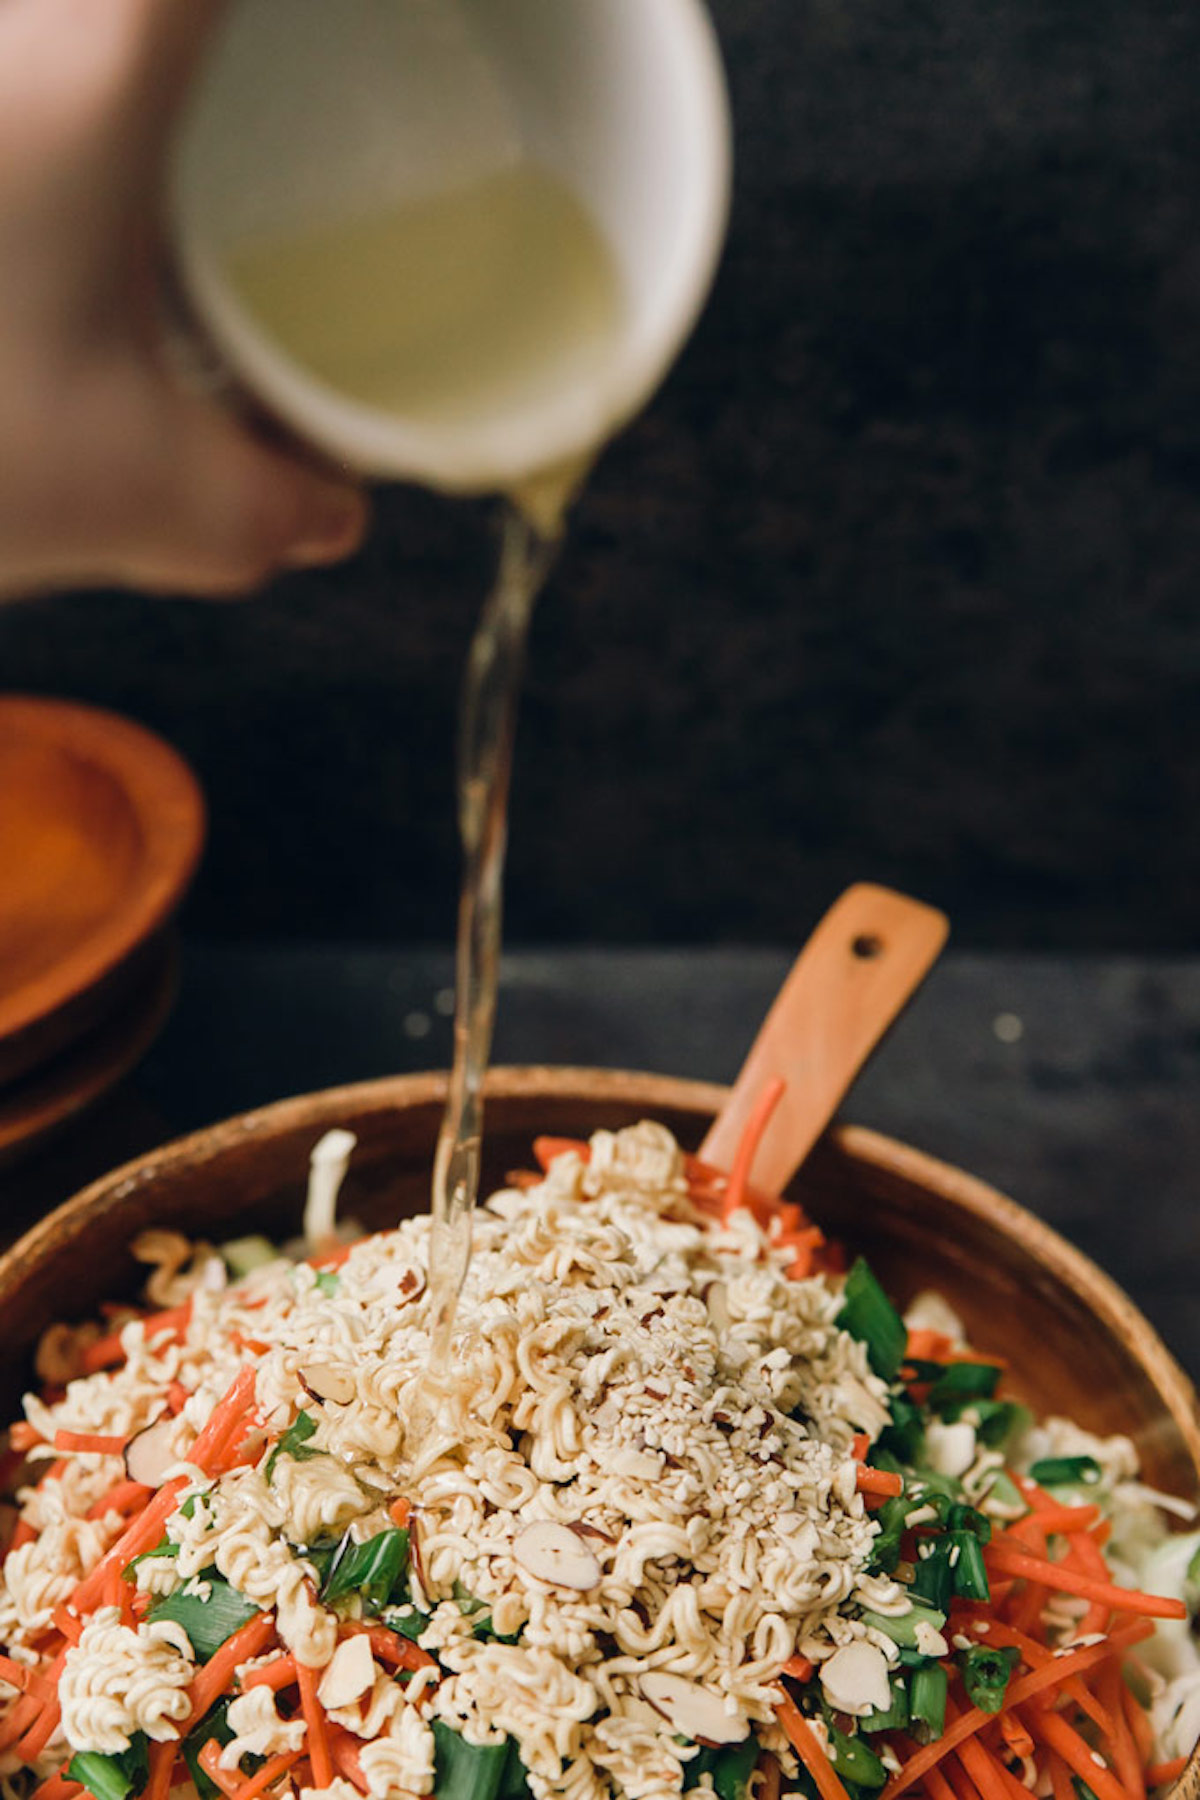 Sesame dressing being poured on top of a toasted noodle salad.